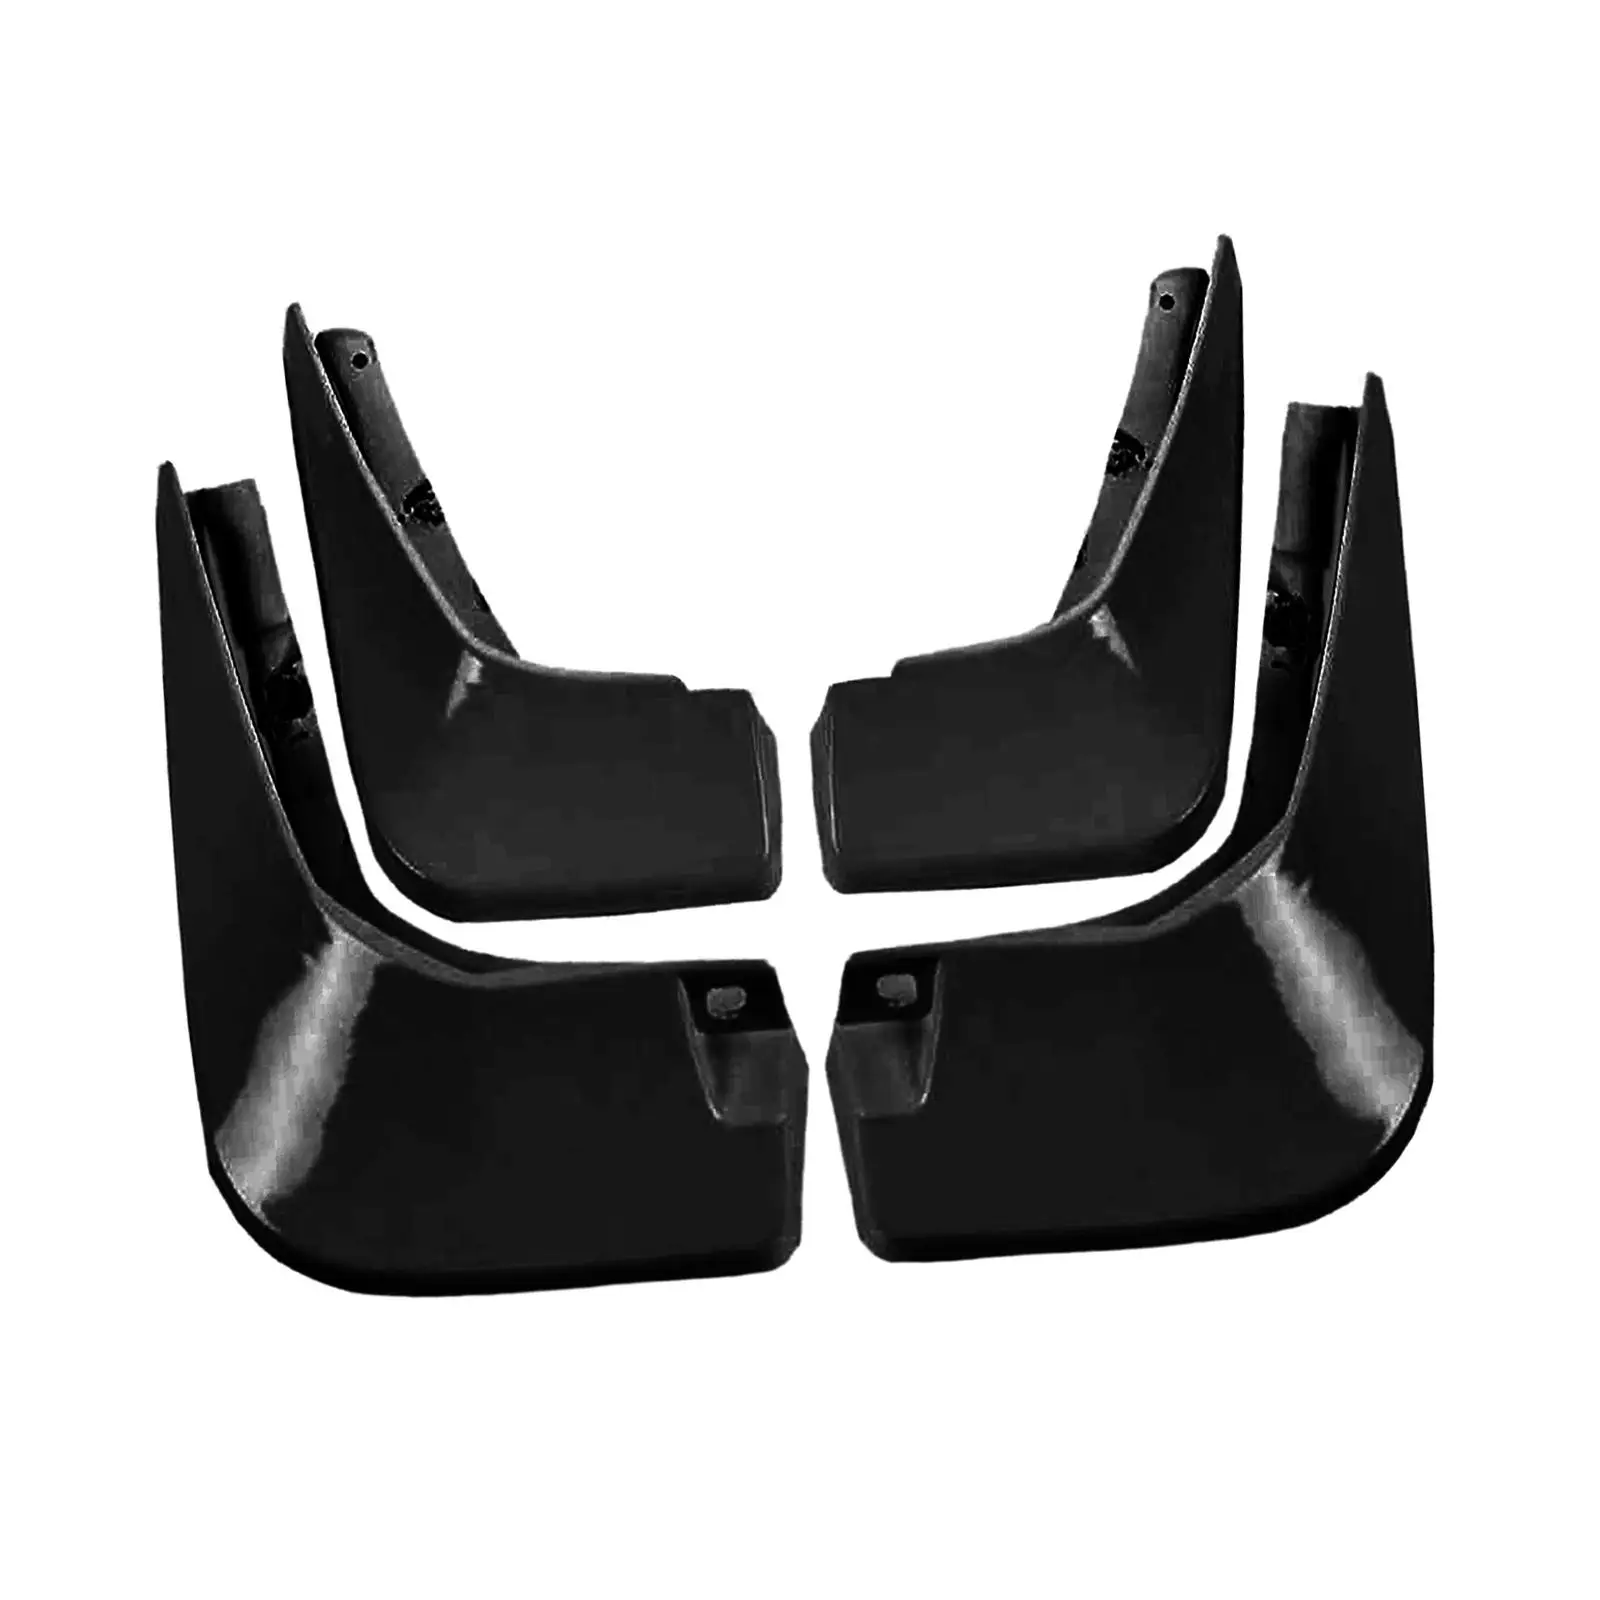 4x Sturdy Mudguards Mudflaps Fender Car Heat Resistant for Byd Yuan Plus 2022 Accessory Direct Replaces Assembly Parts